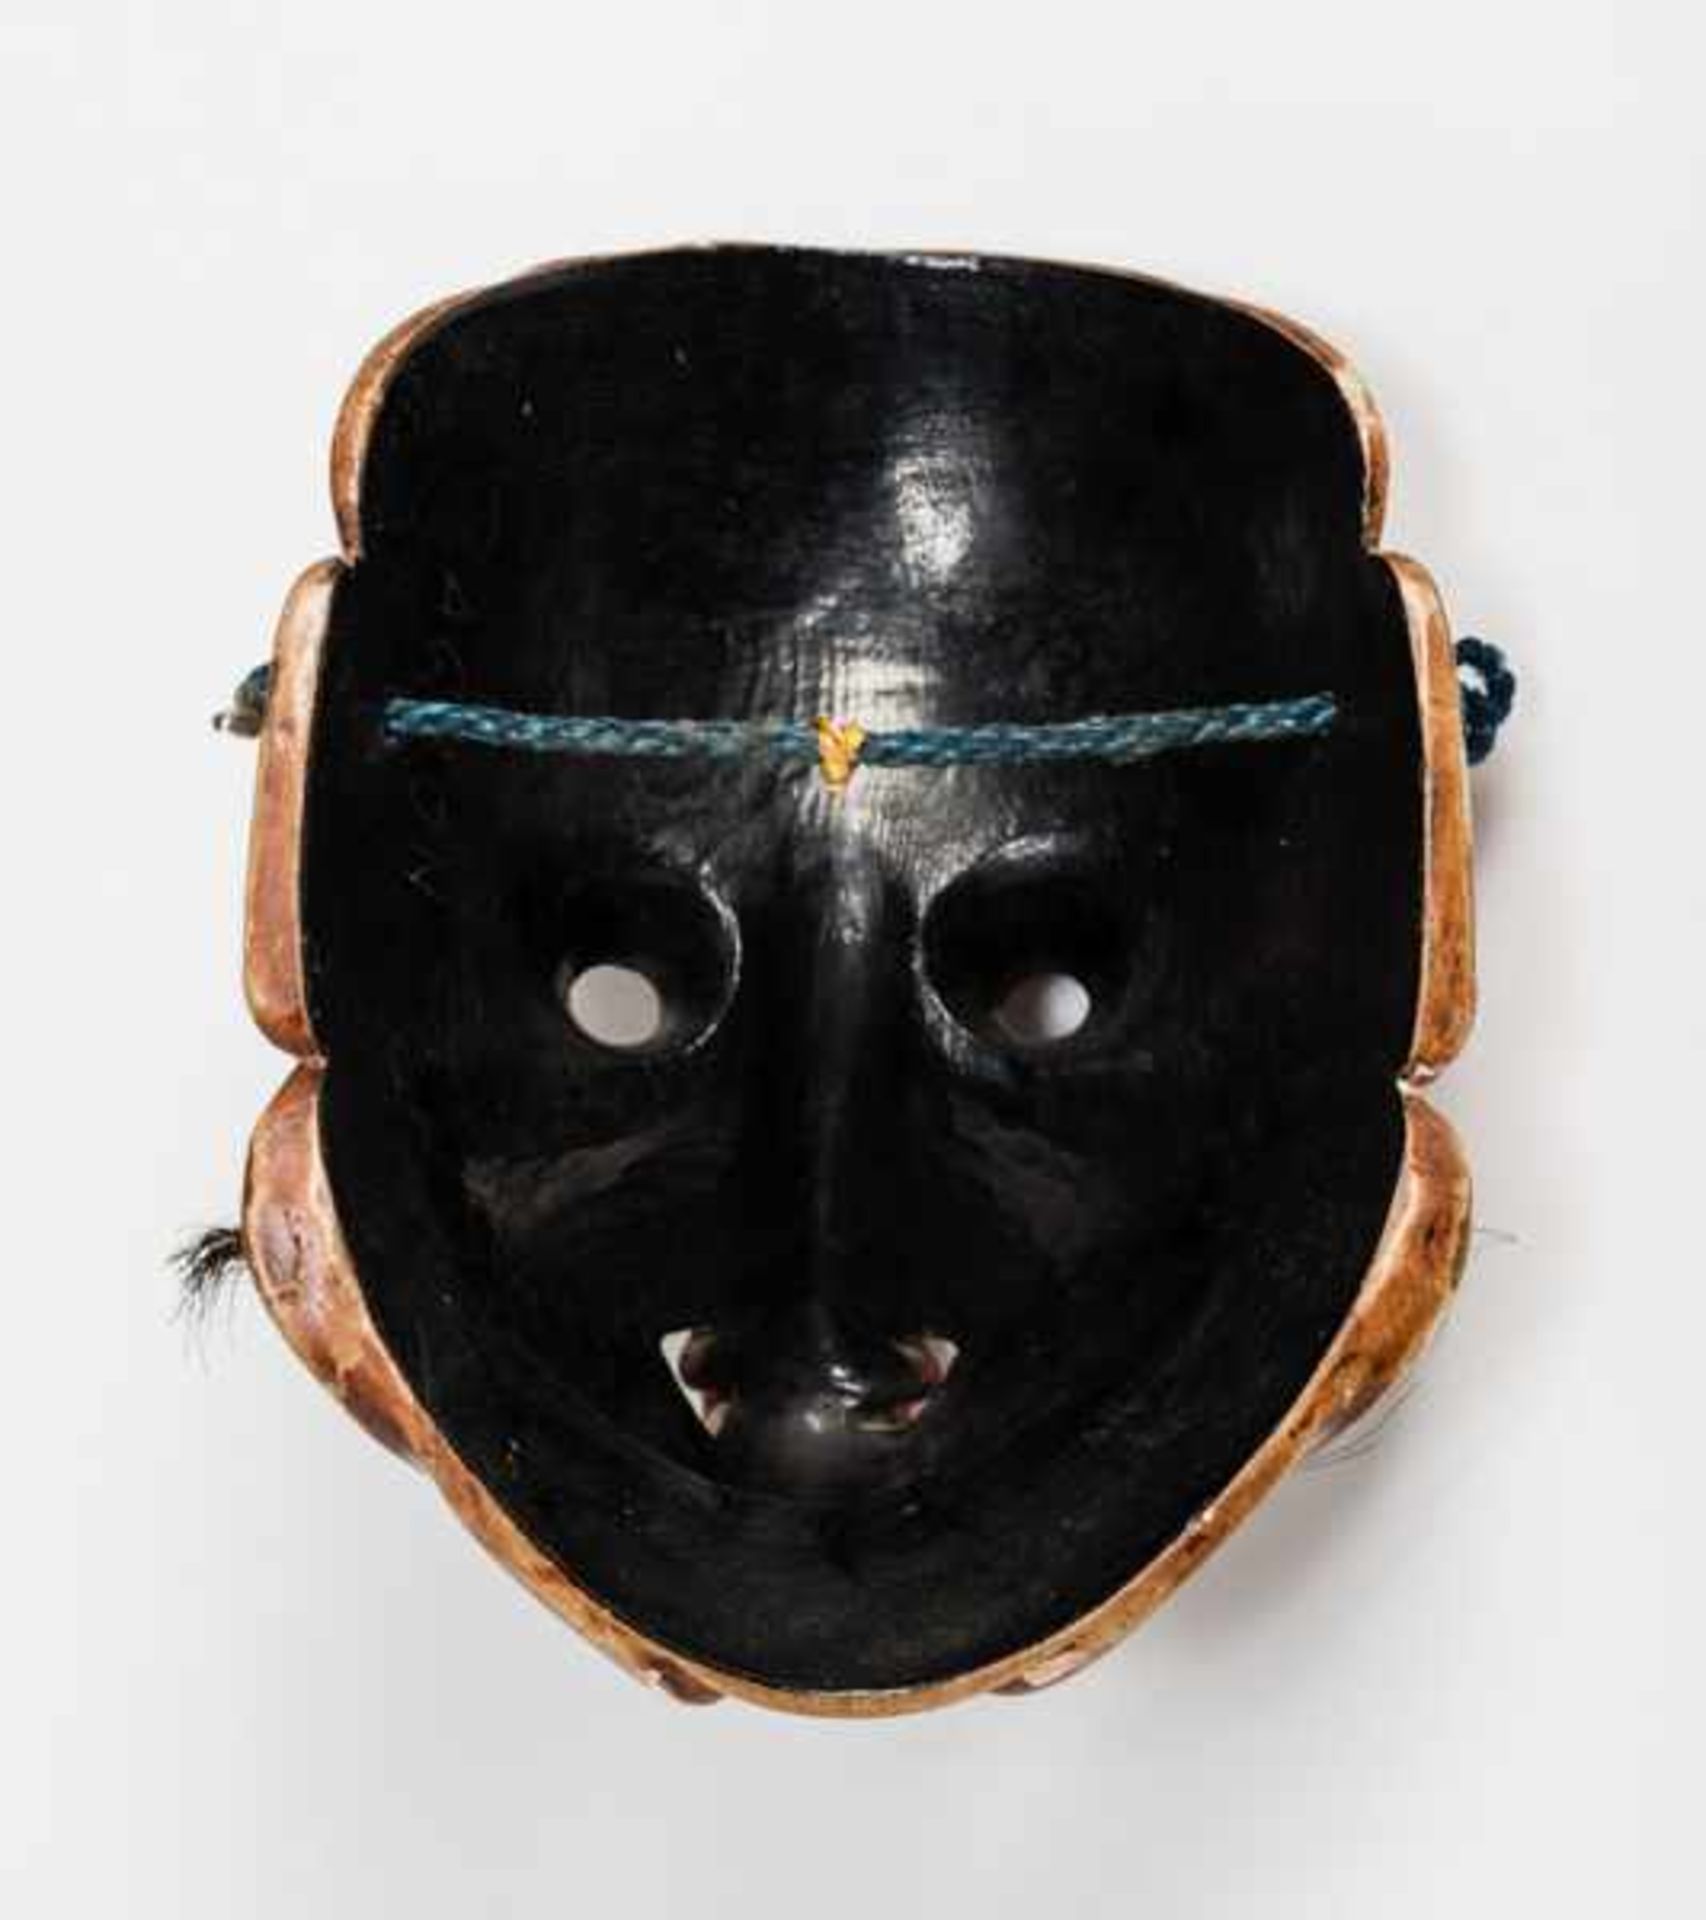 A KYOGEN MASK OF TOBI (BLACK KITE) Wood, gesso, pigments and animal hair. Japan, Edo period 17th – - Image 4 of 4